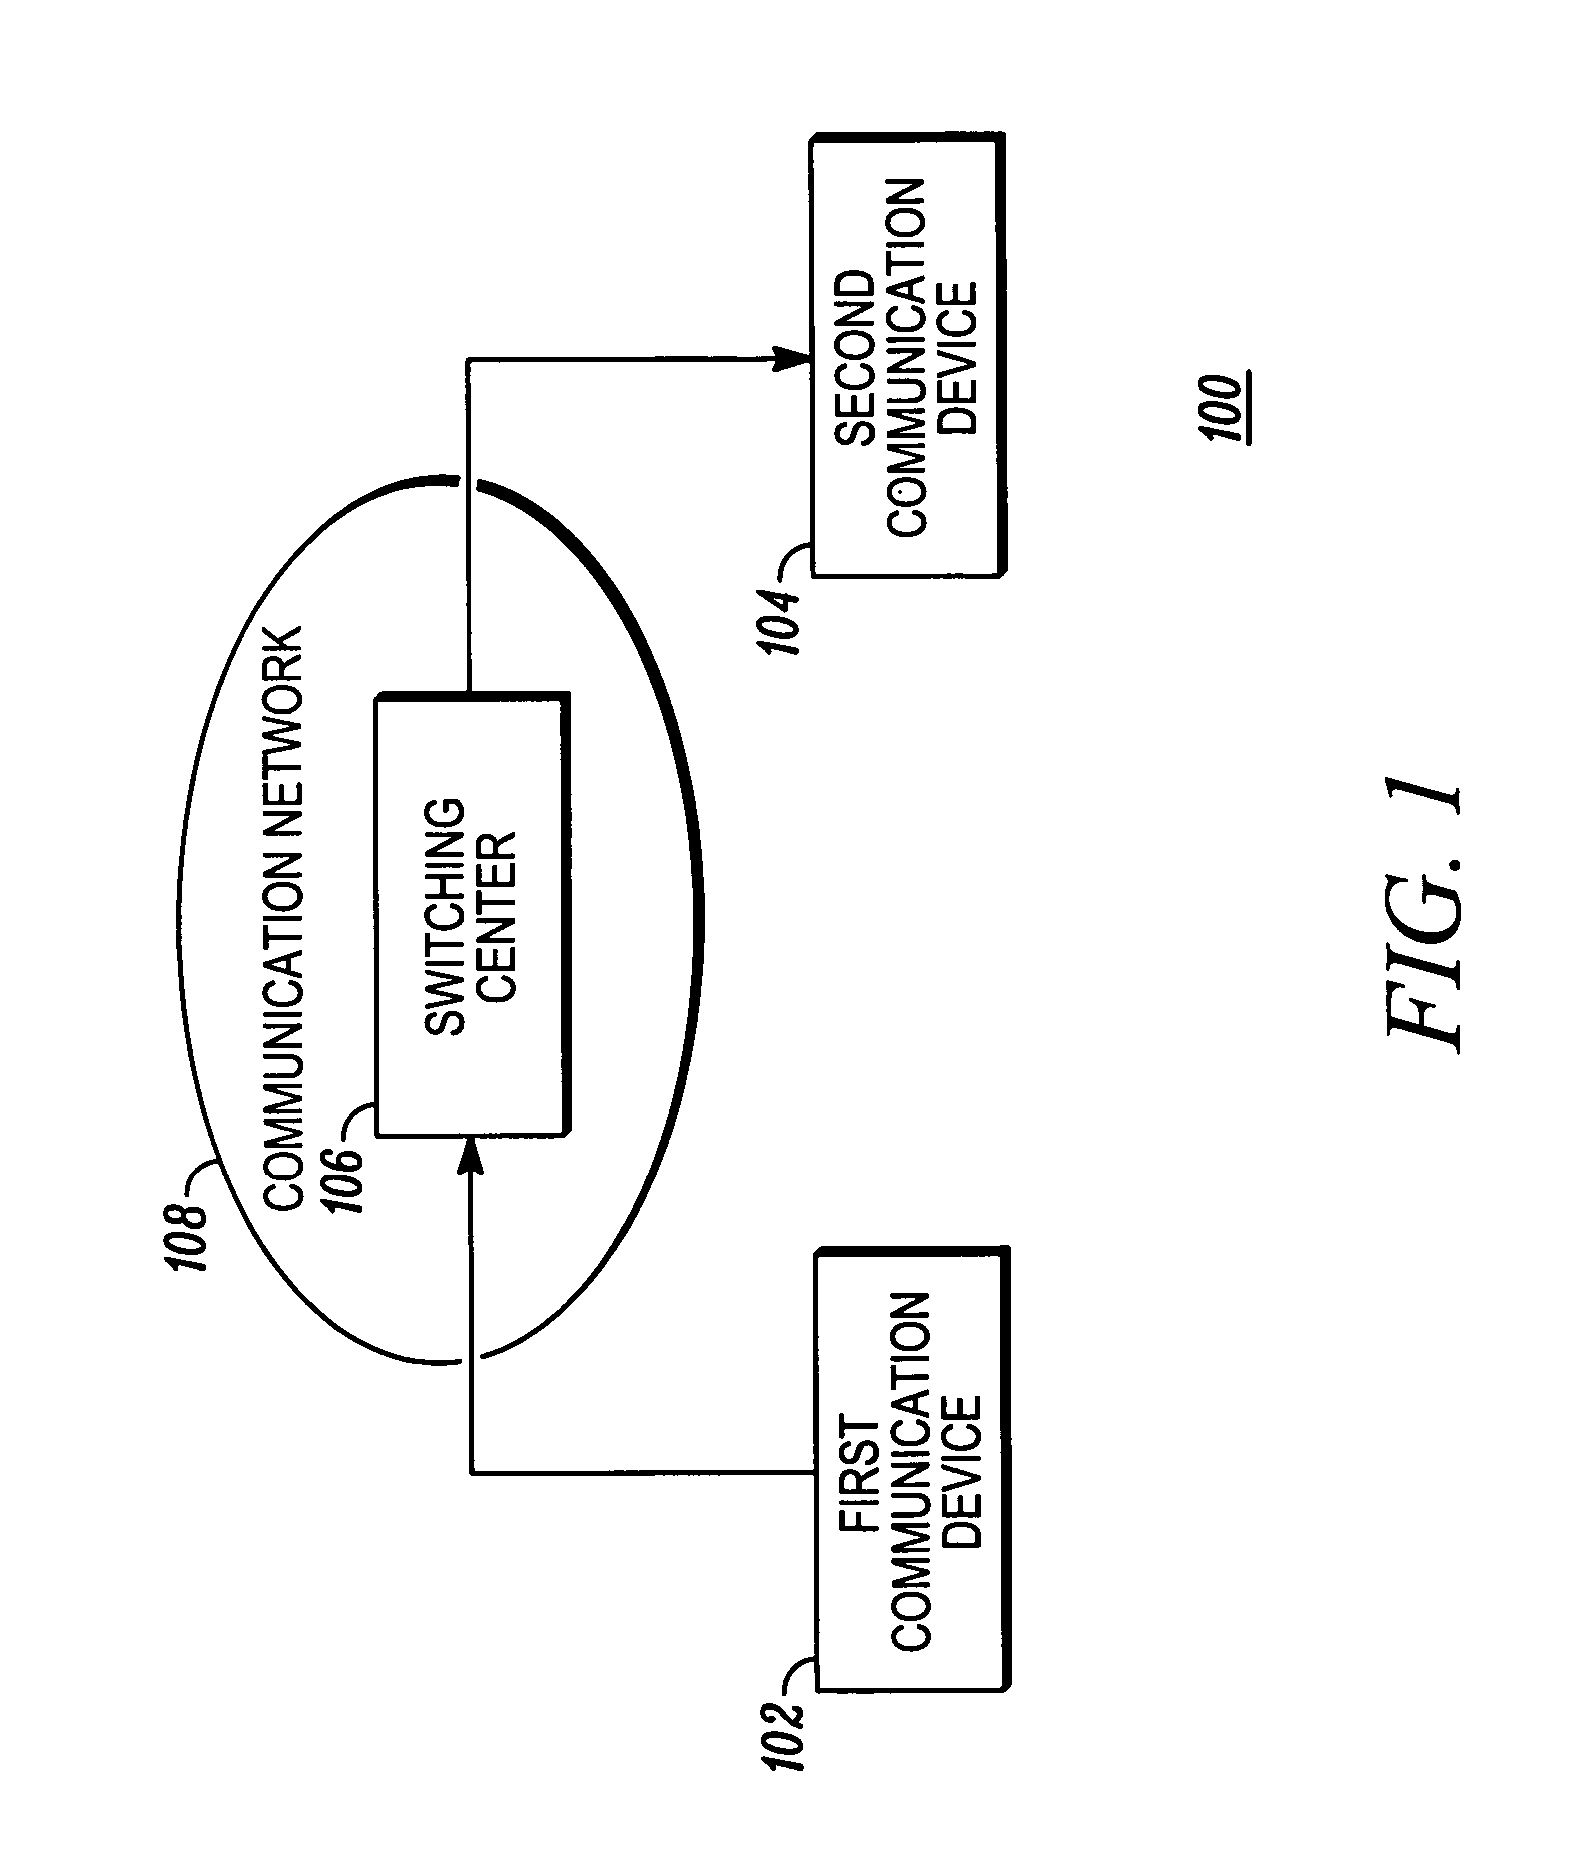 Method and communication device for providing a personalized ring-back